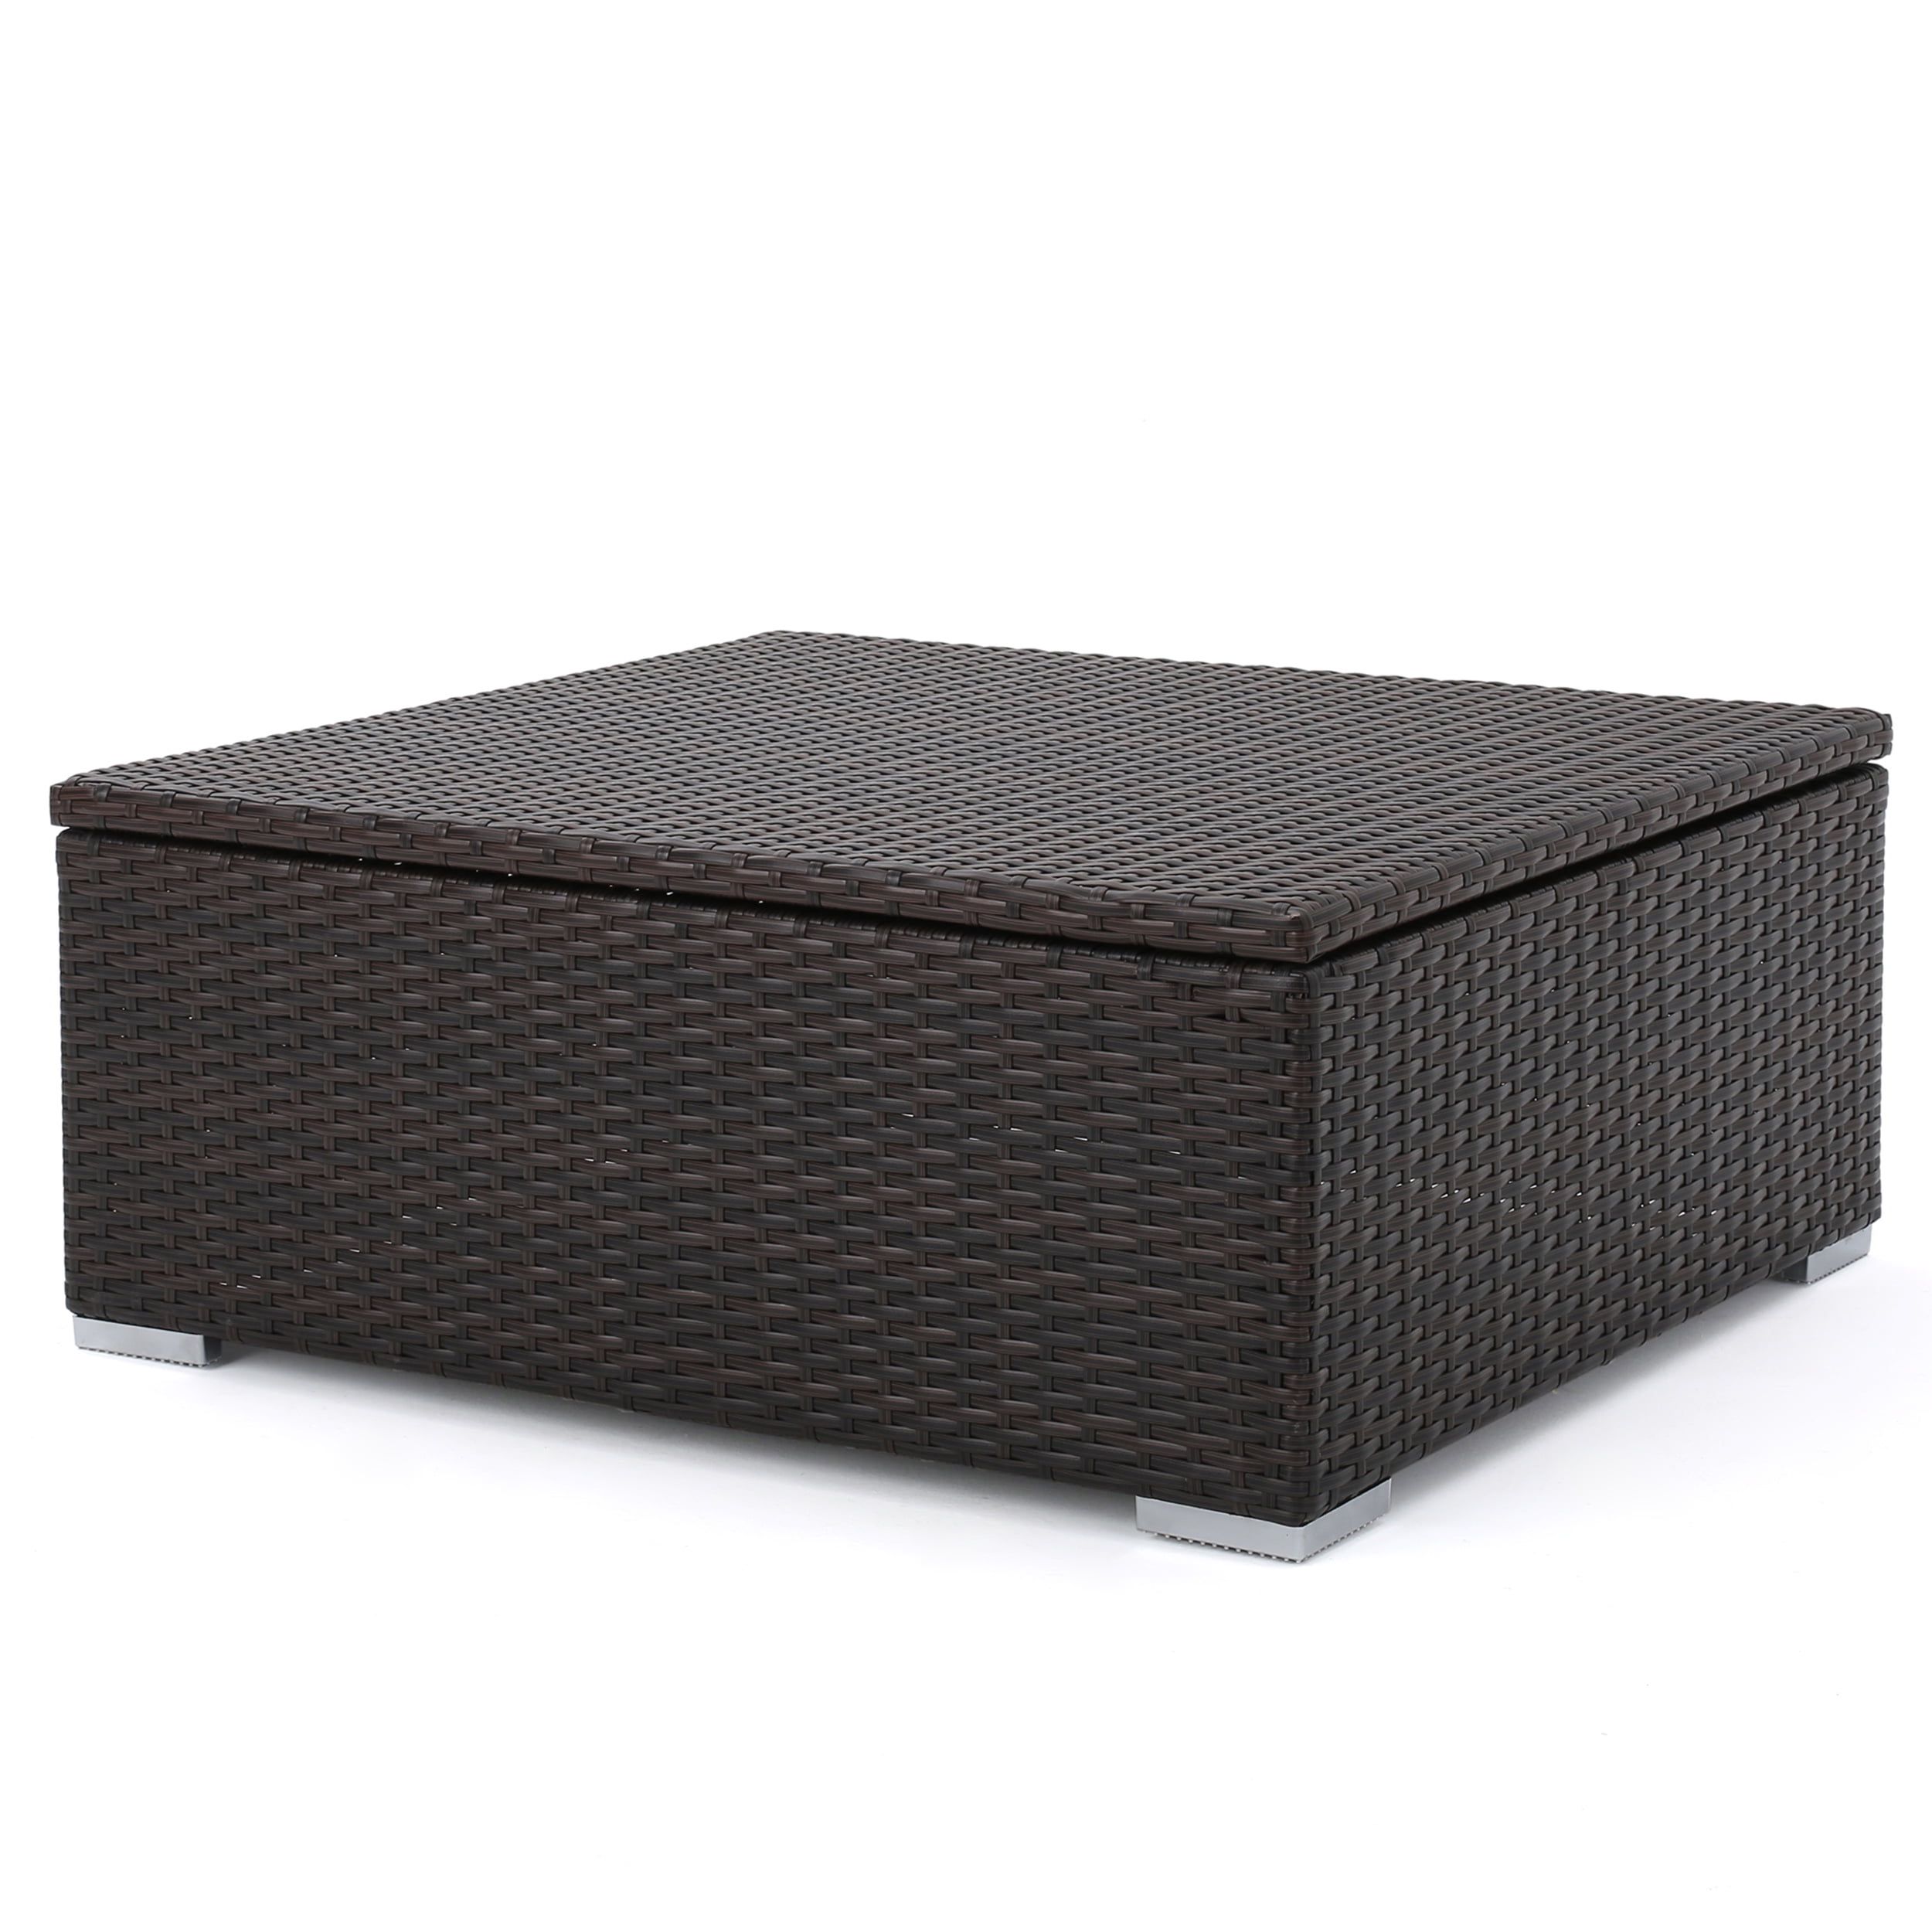 Costa Mesa Outdoor Wicker Coffee Table With Storage, Multibrown Pertaining To Outdoor Coffee Tables With Storage (View 3 of 15)